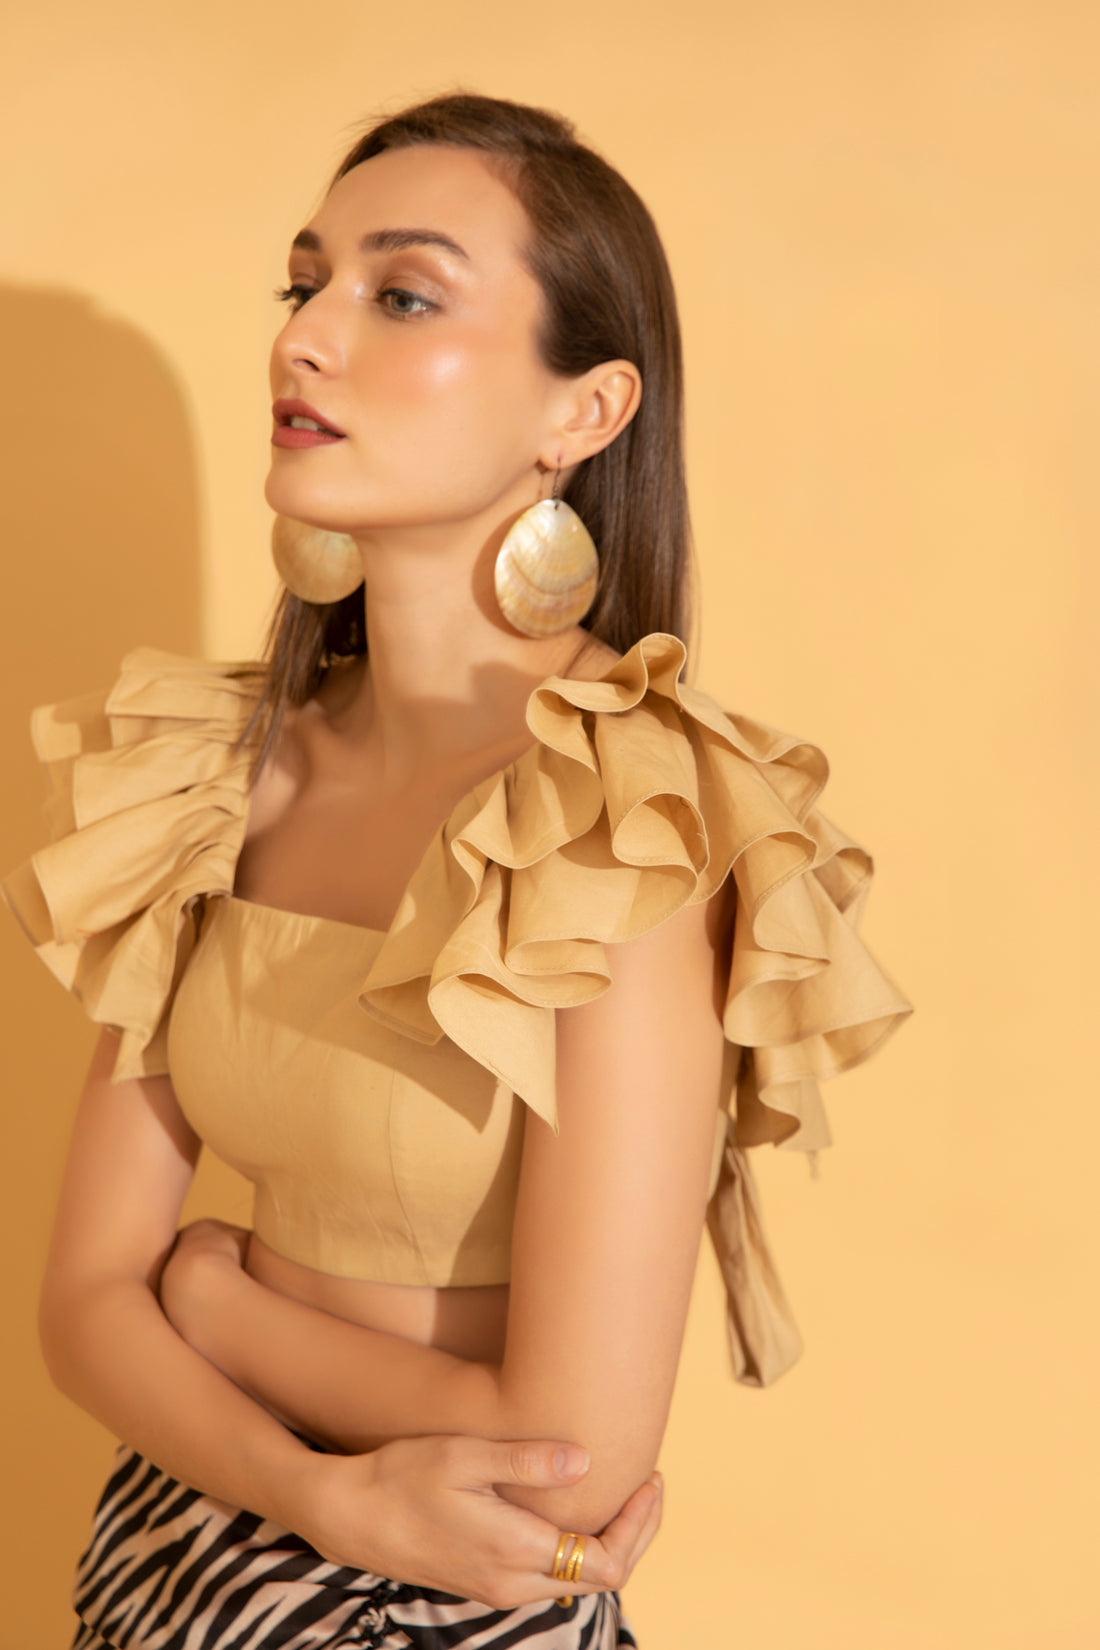 Playful and fun ruffles as seen on a beige cotton top from Torqadorn